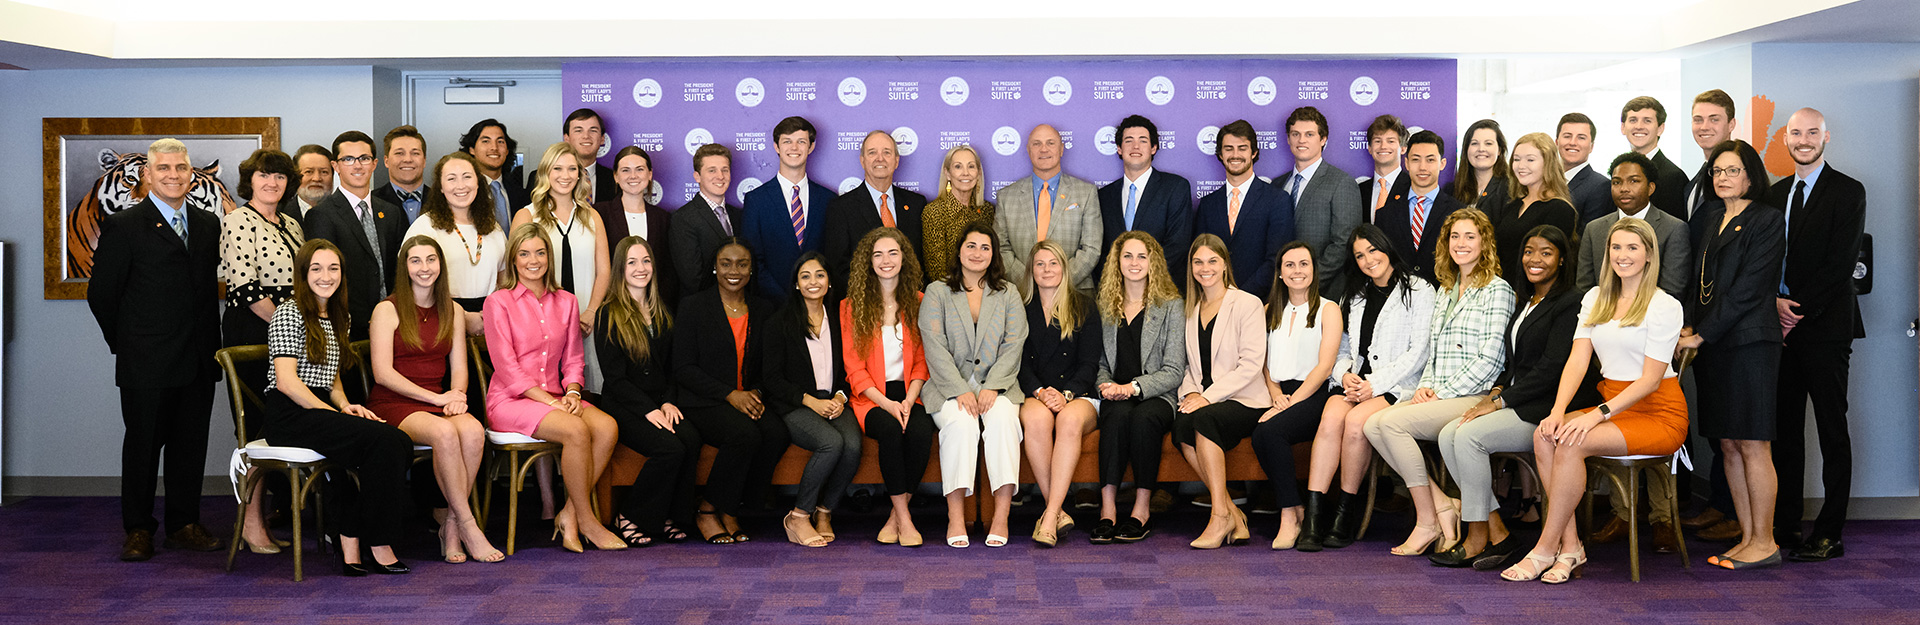 Group photo of Chapman Scholars with President Clements